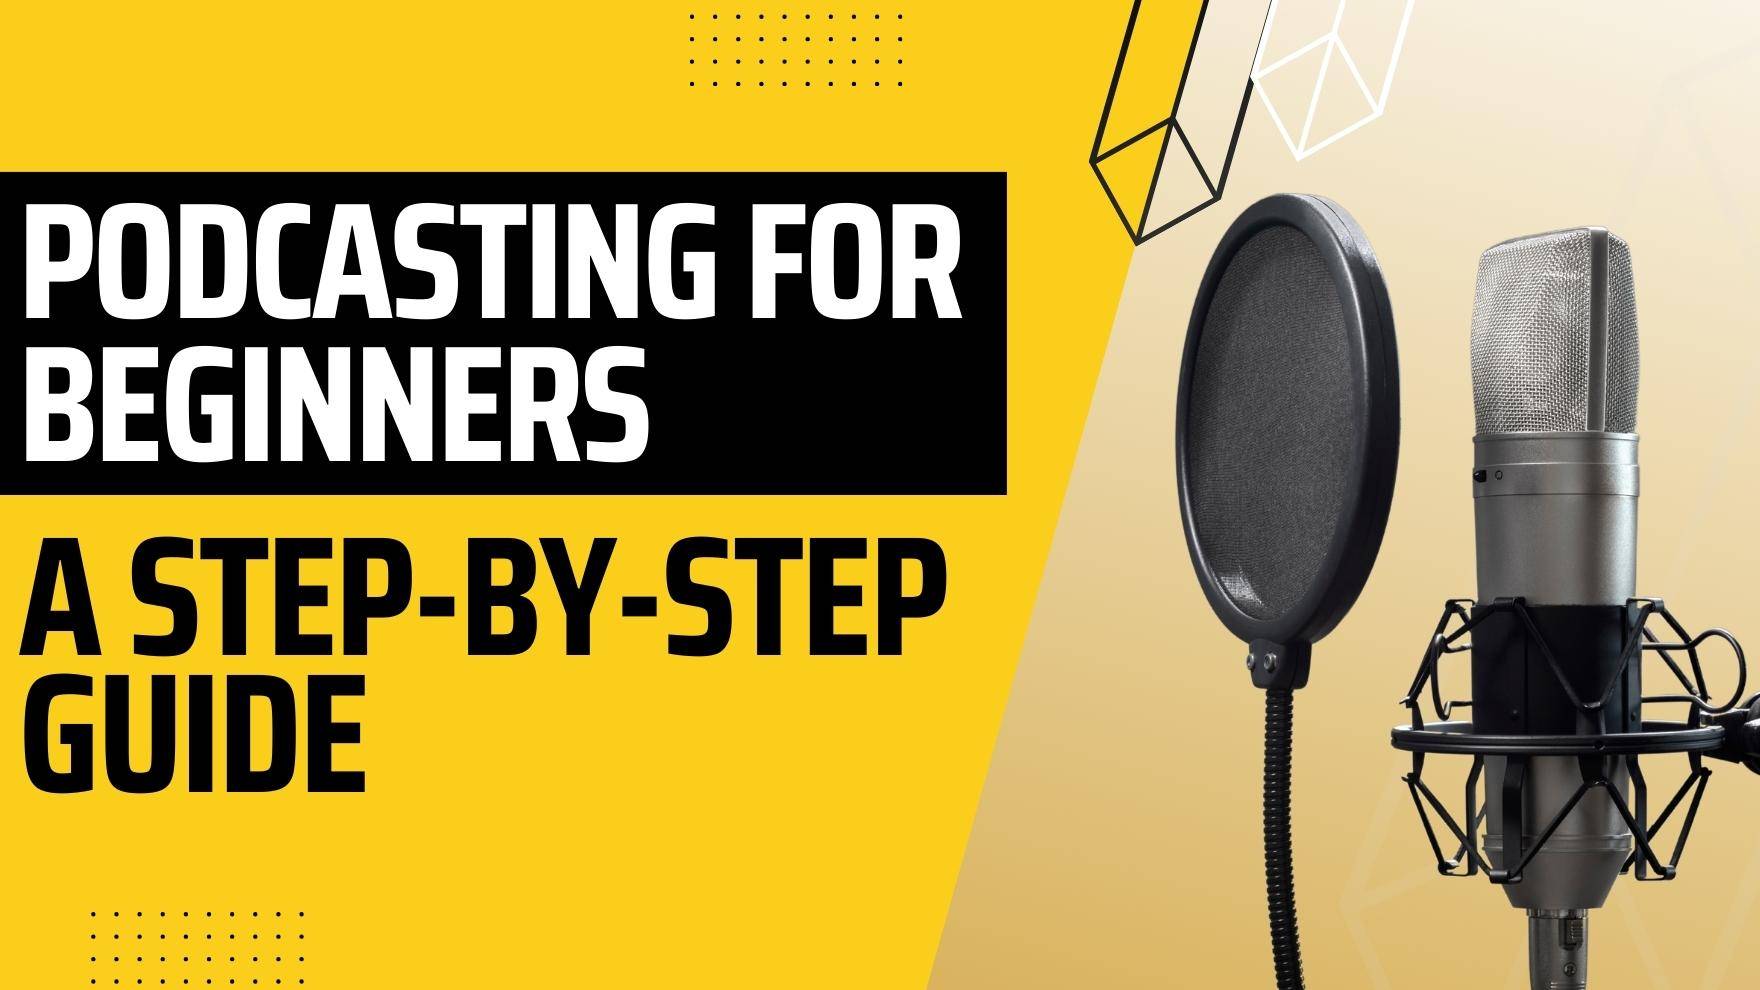 Podcasting For Beginners: A Step-by-Step Guide